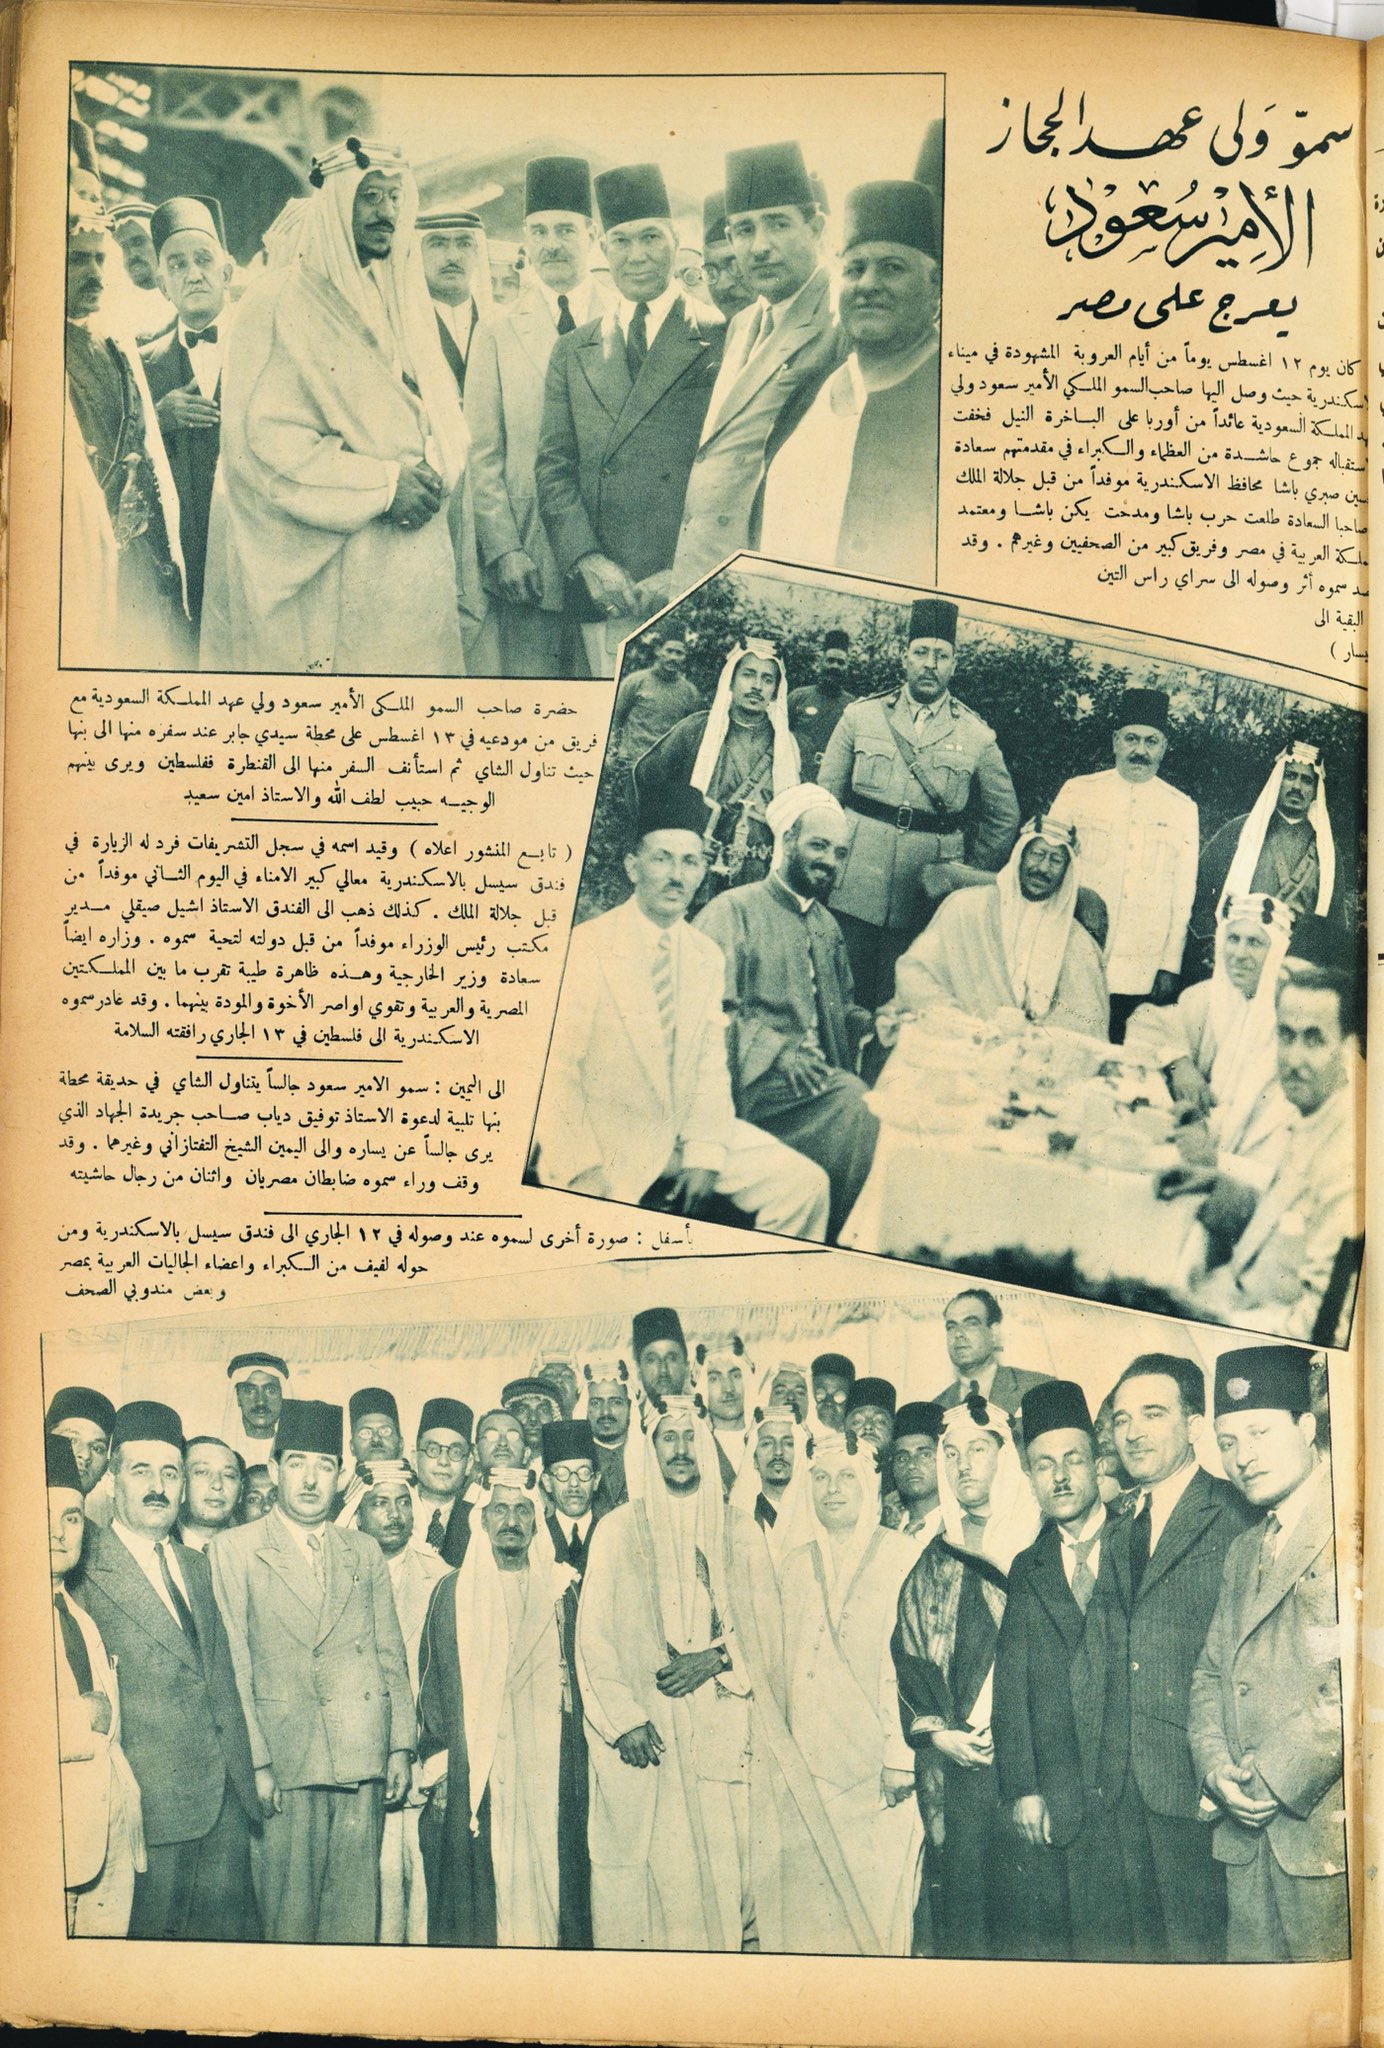 Crown Prince Saud upon his departure from the Nile ship and his successor His Excellency Hussein Sabri Pasha and His Excellency Mr Mohamed Sadiq Al-Majdidi